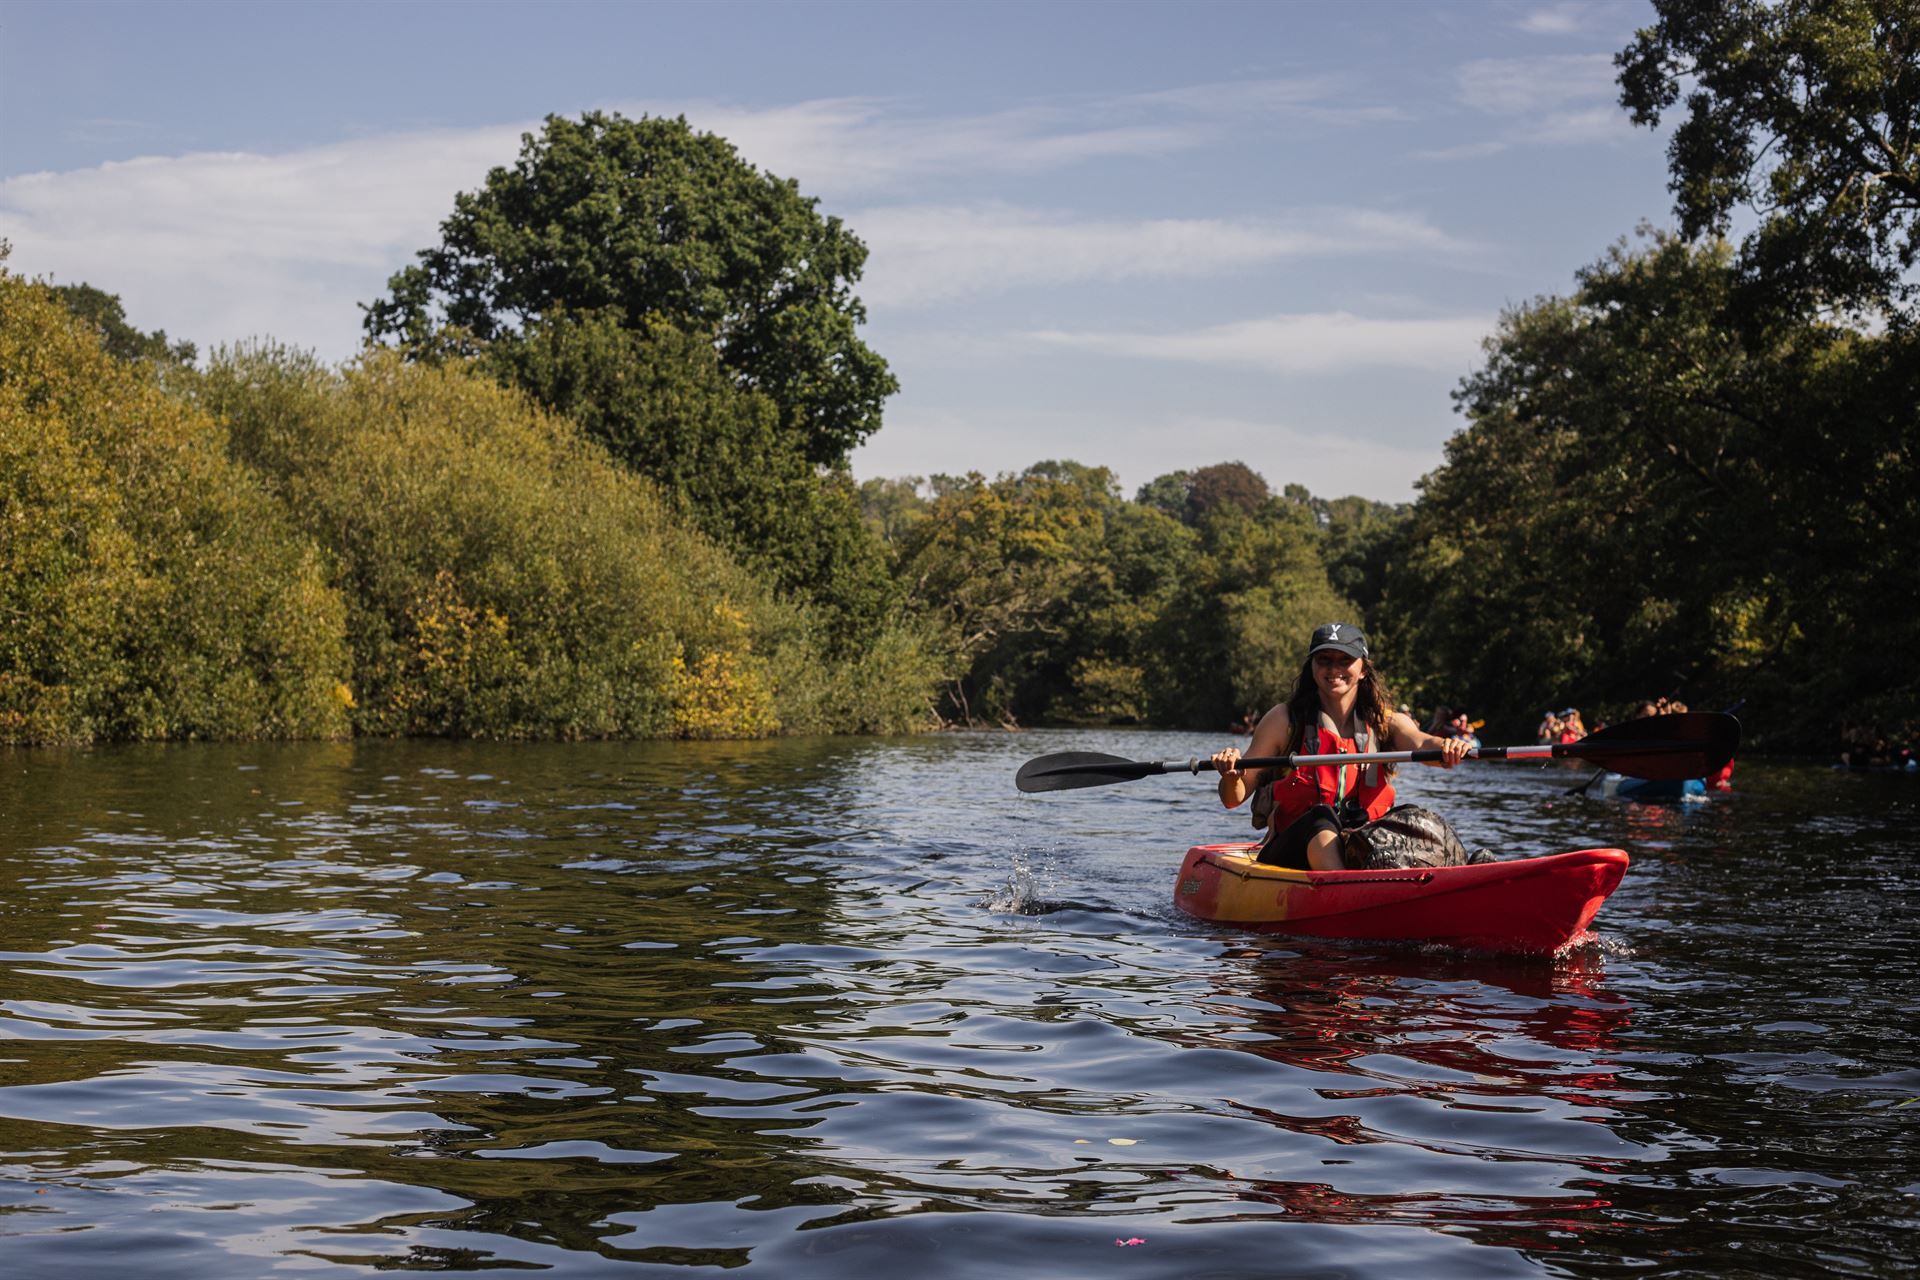 The students experienced the River Dart engaging in various activities (© Jessica Droujko).